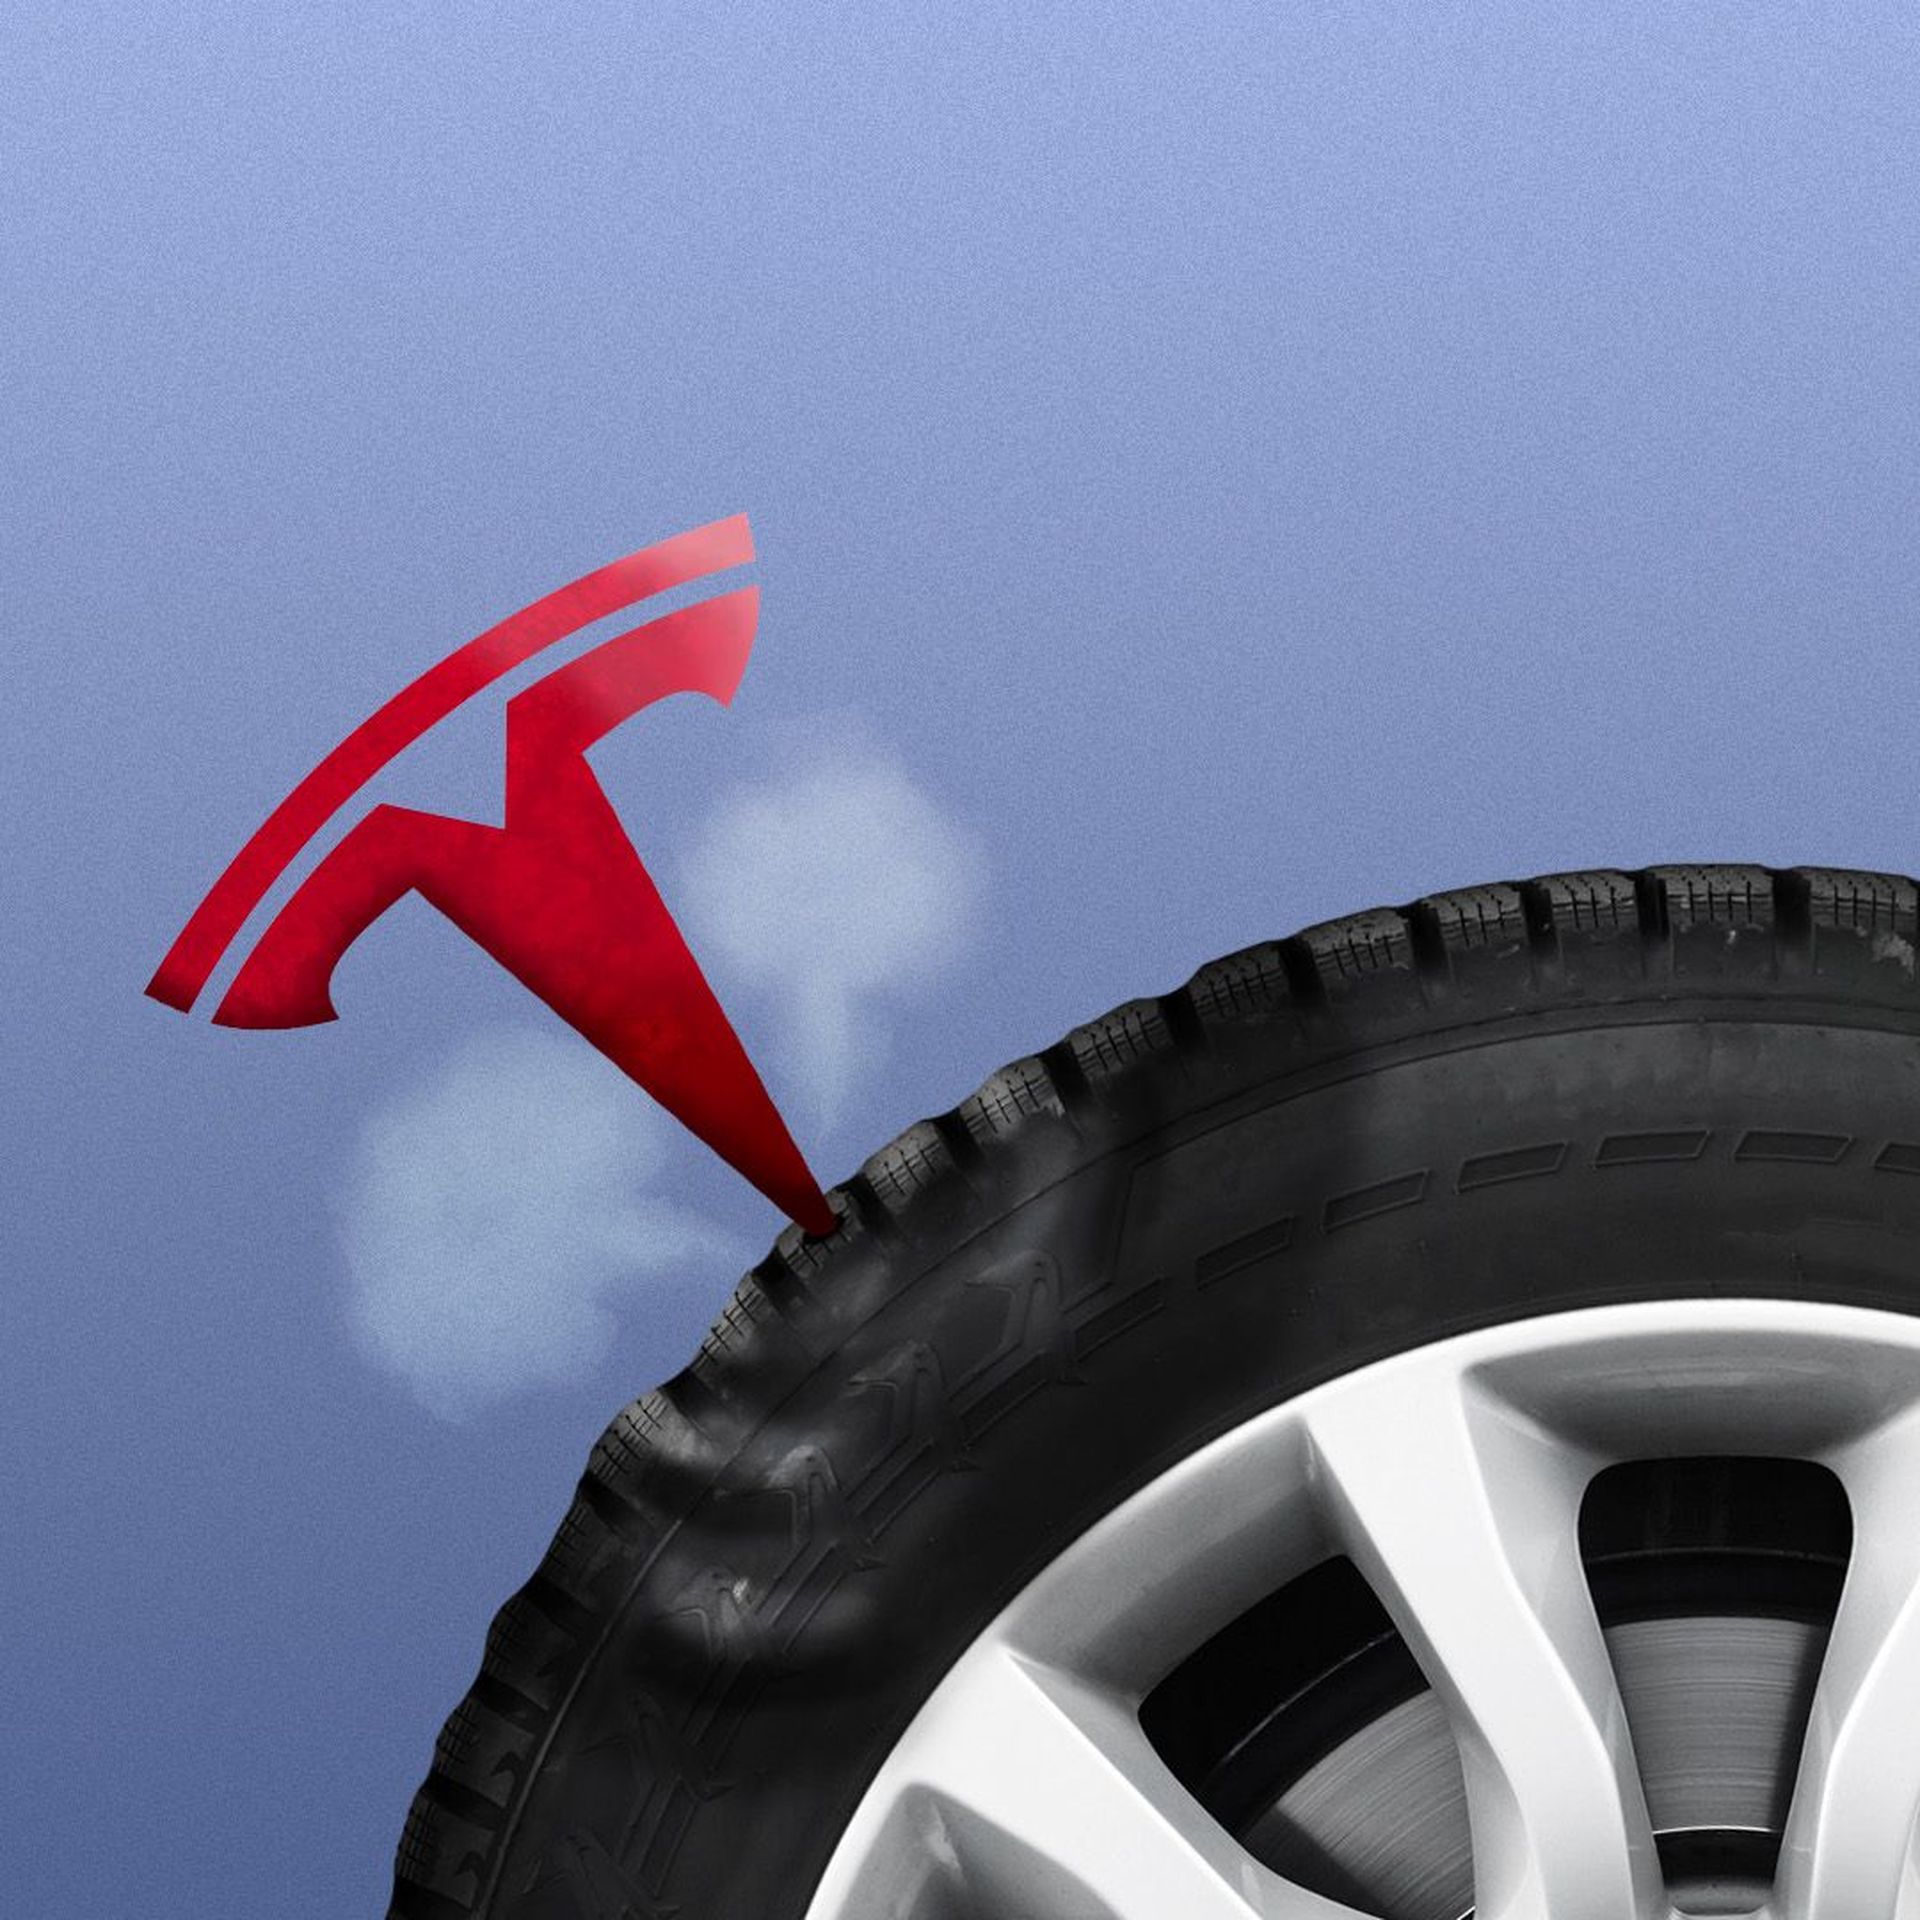 Illustration of the Tesla logo puncturing a tire like a nail